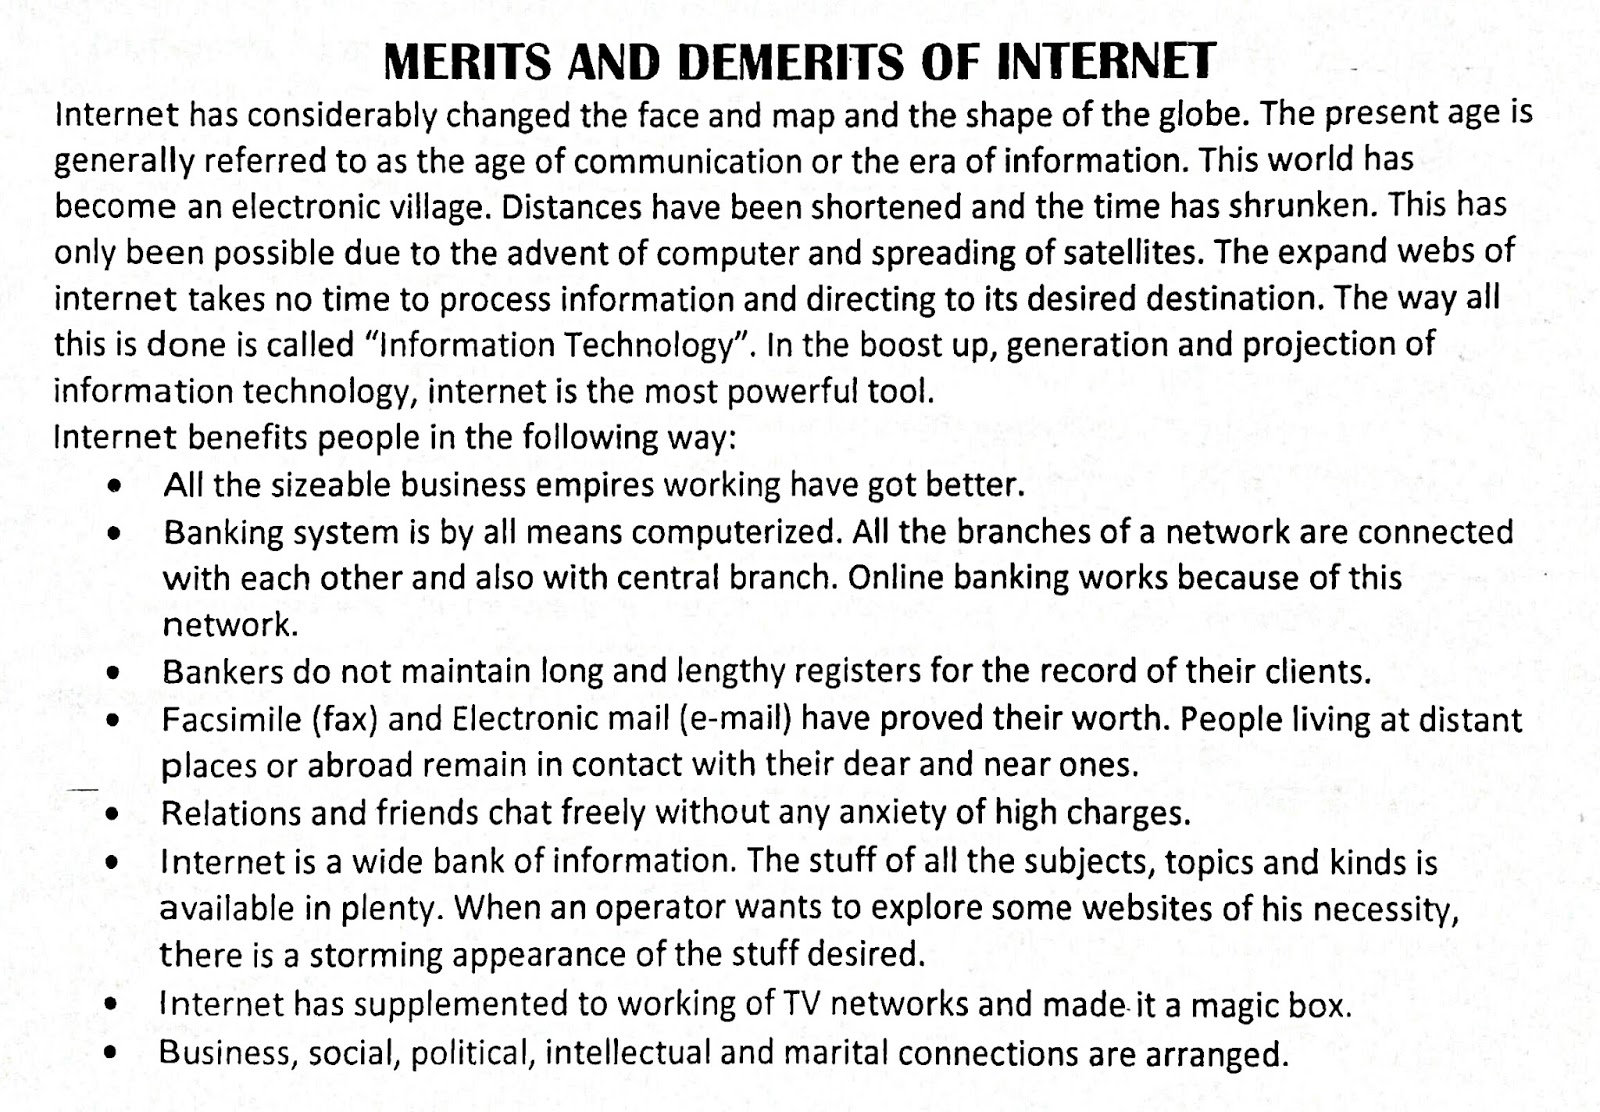 write an essay on merits and demerits of internet